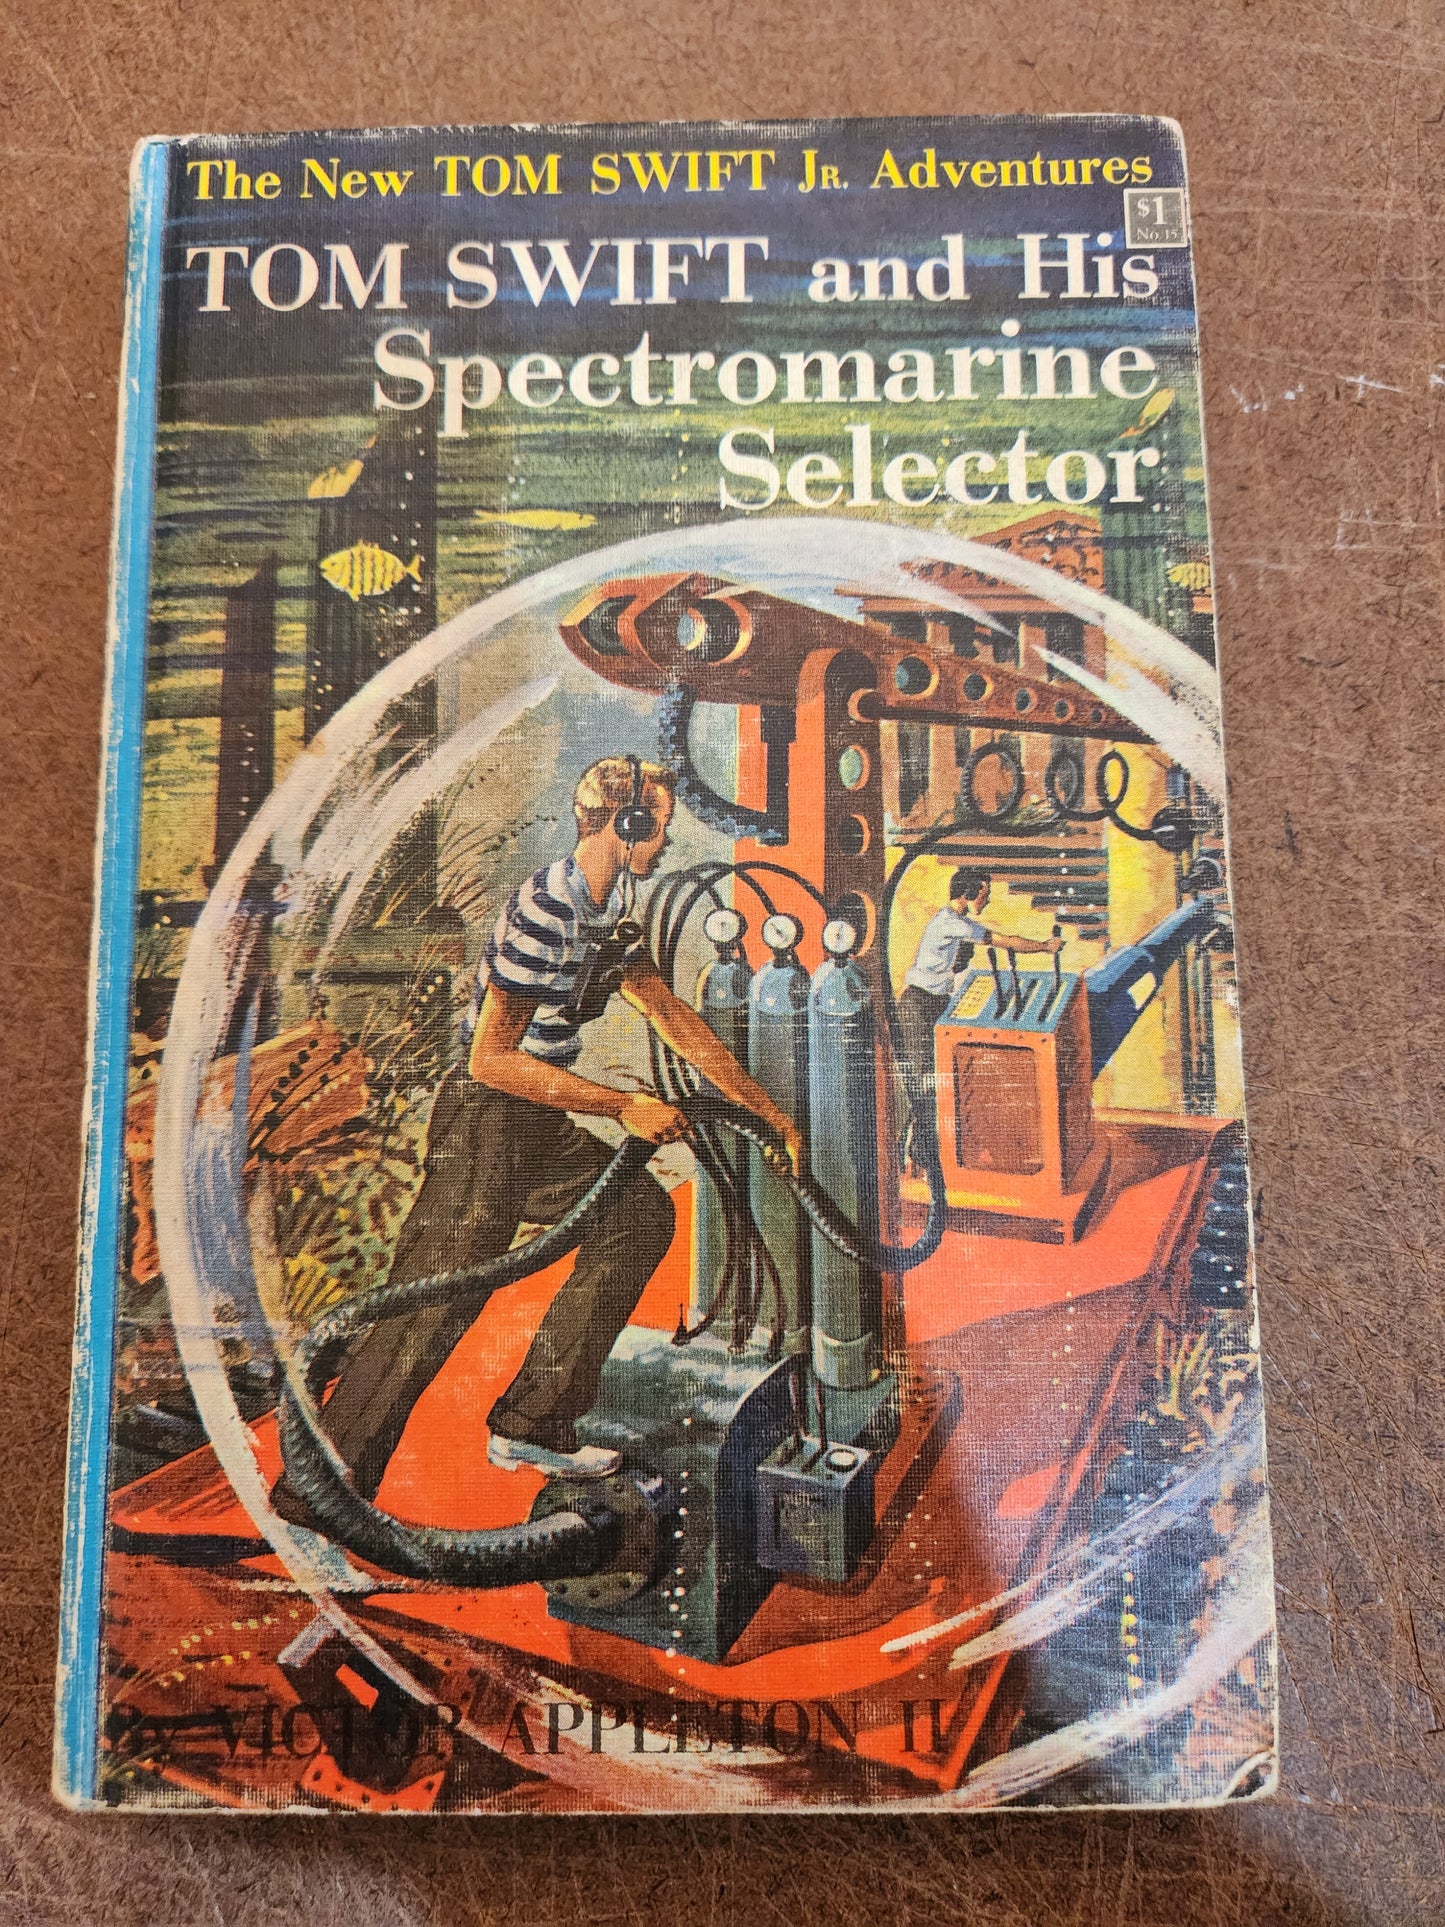 "Tom Swift and his Spectromarine Selector" by Victor Appleton II (Blue Spine)